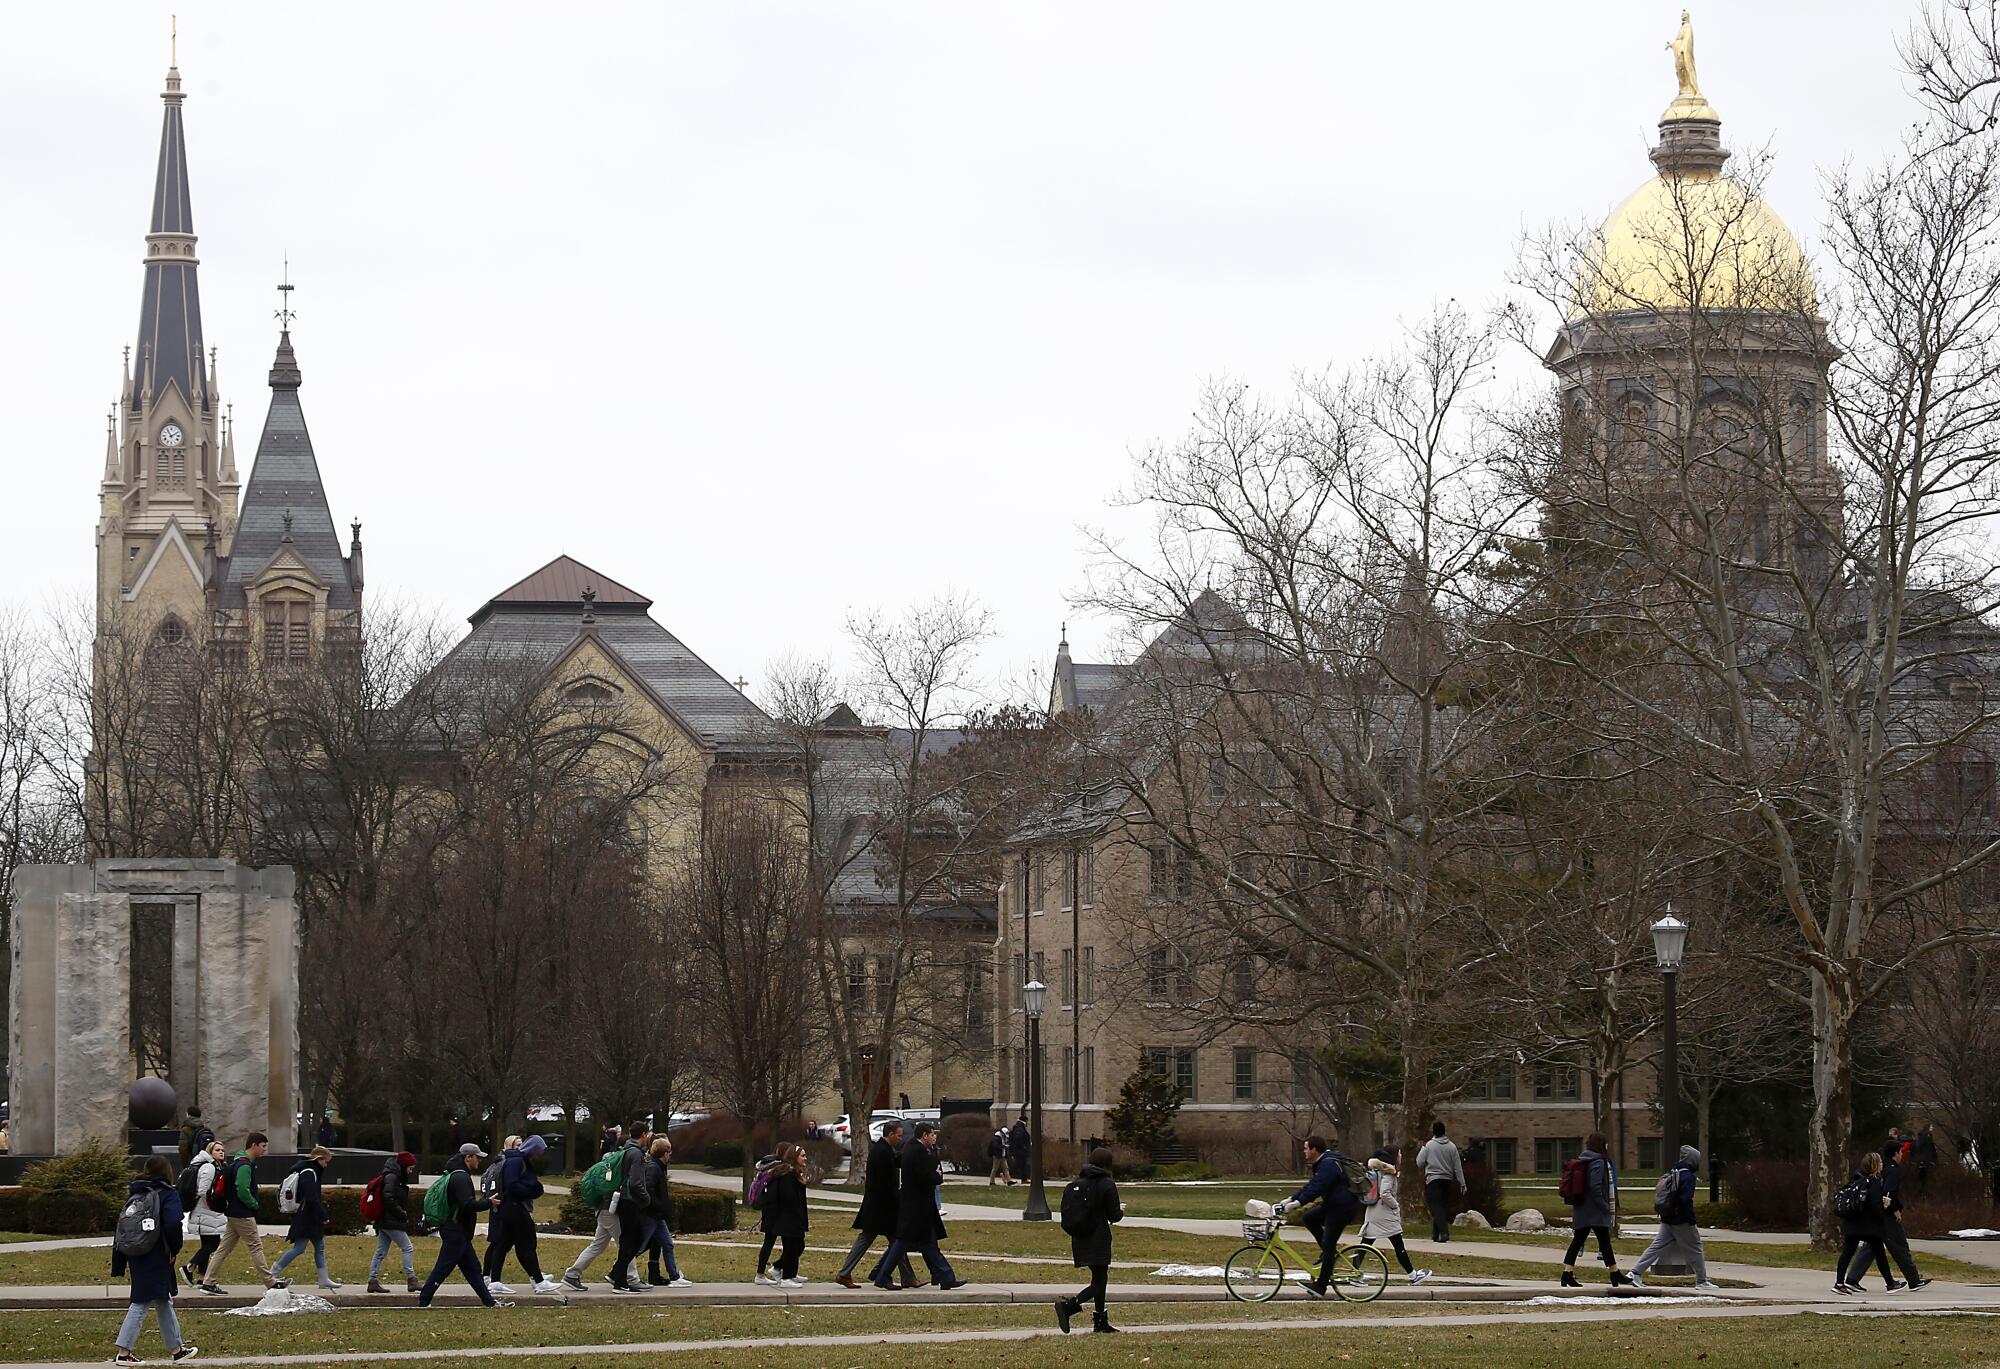 Students walk across the campus of the University of Notre Dame on the outskirts of South Bend, Ind.